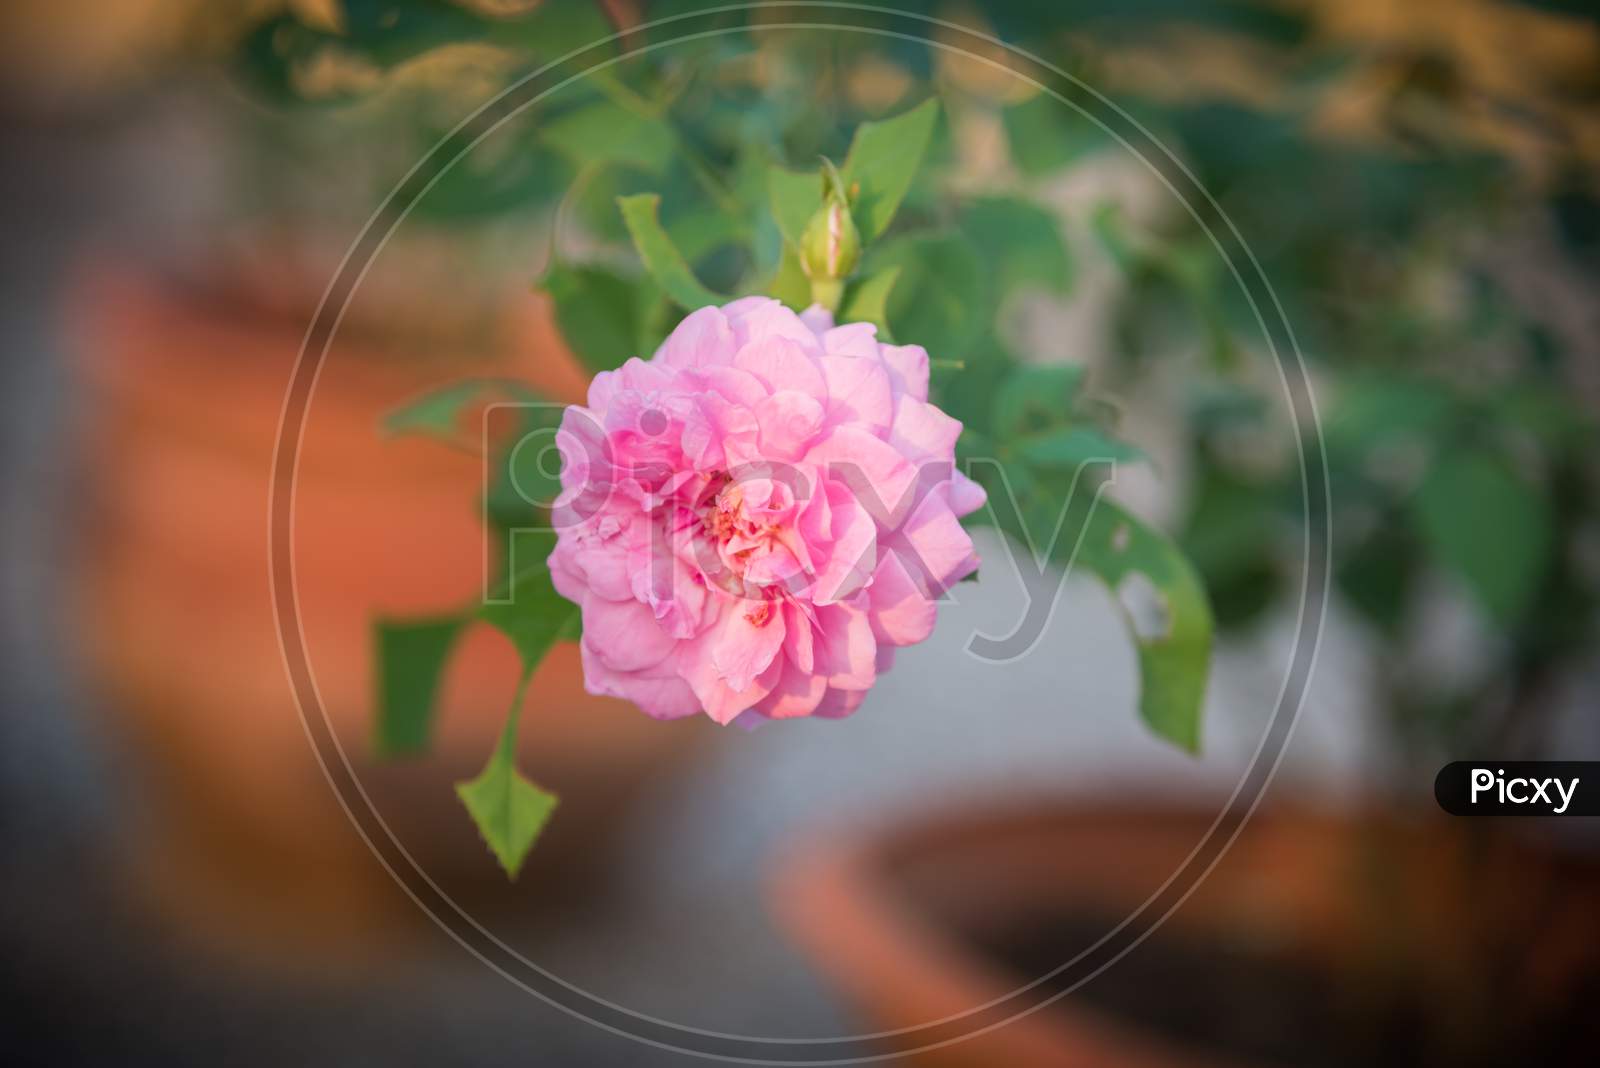 A beautiful pink rose in my small garden